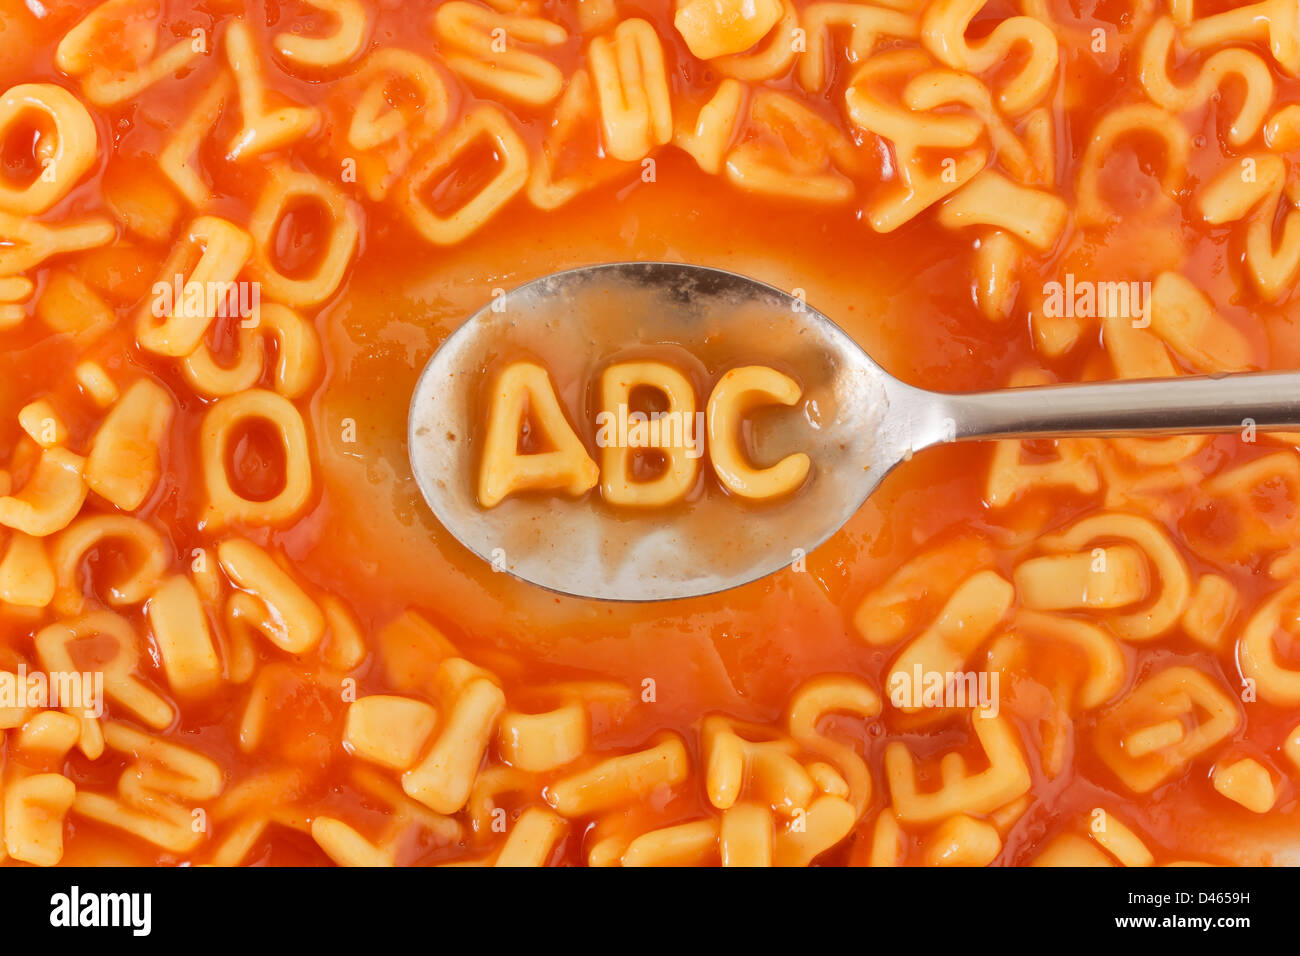 Pasta shaped ABC letters on a spoon within pasta shaped letters in tomato sauce Stock Photo